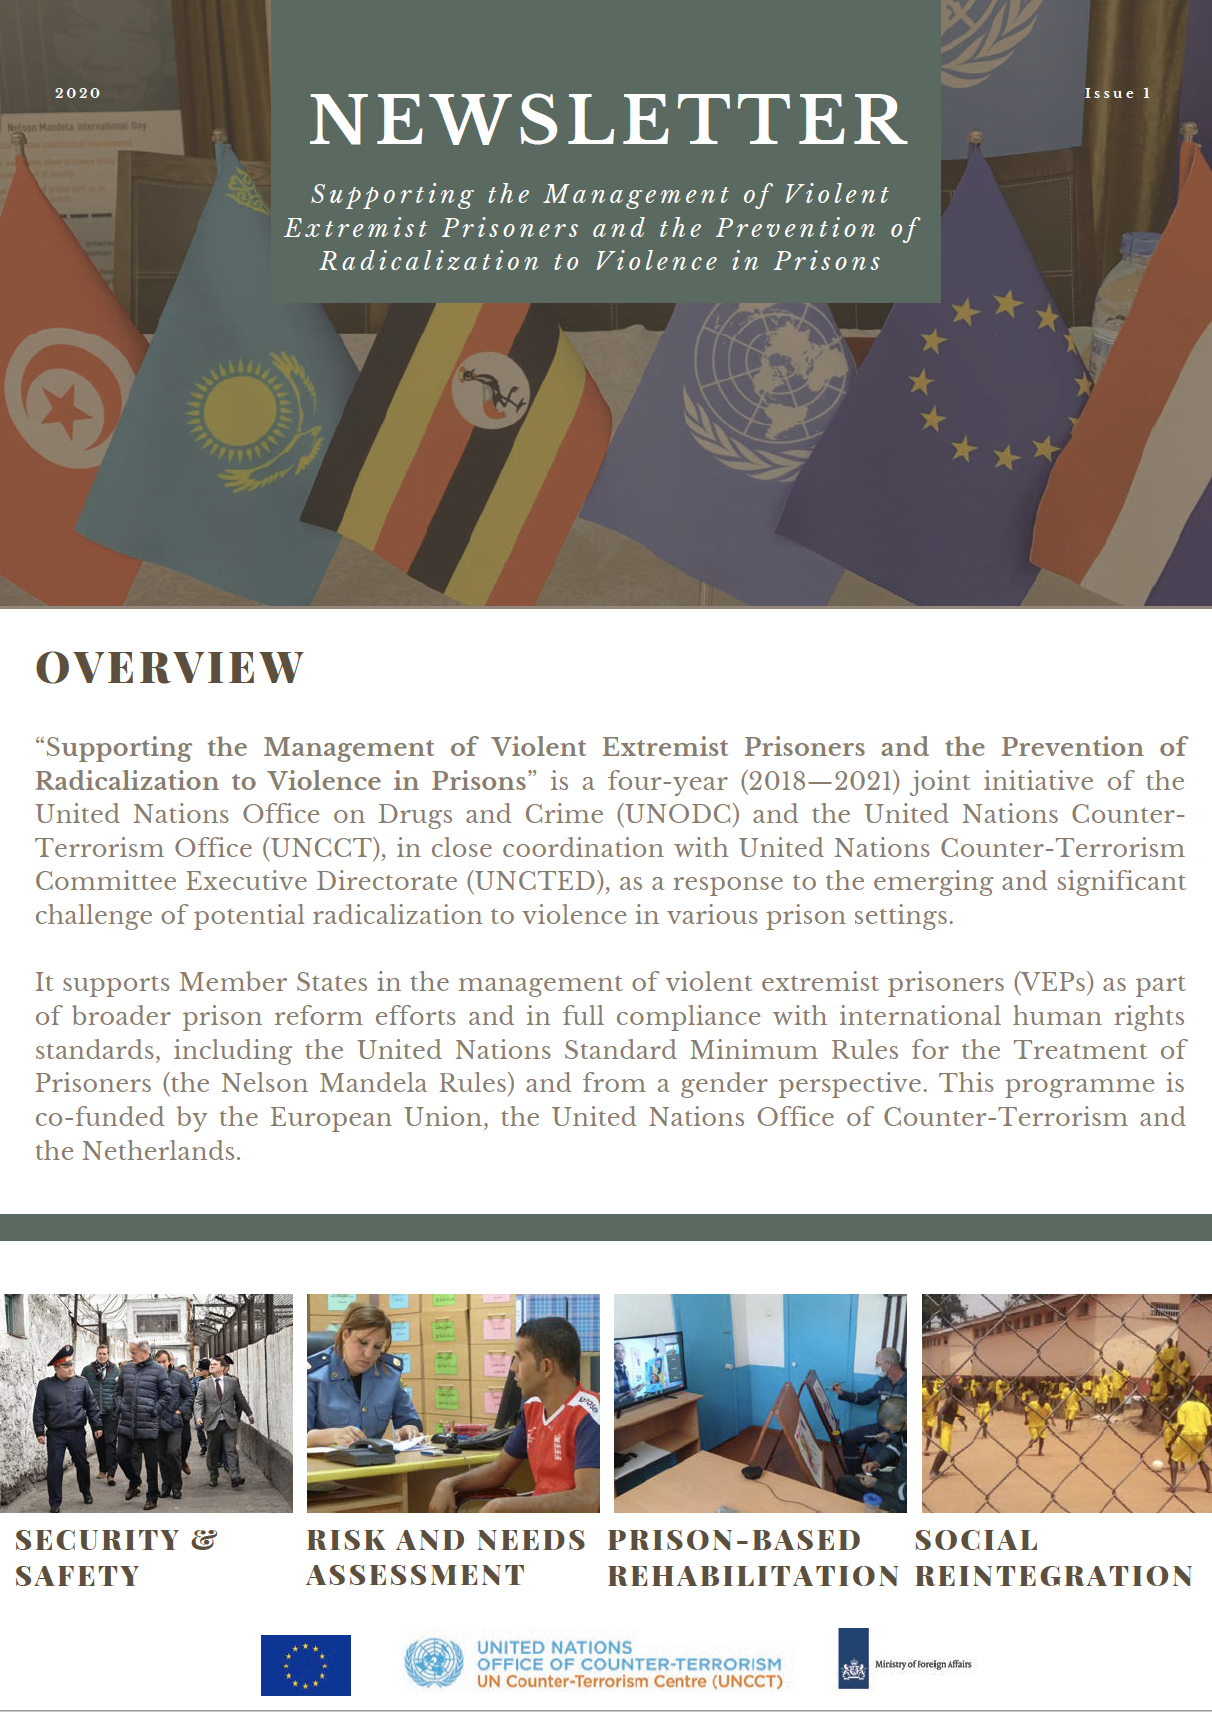 2019 Annual Report on the Fourth Year of the UNCCT 5-Year Programme